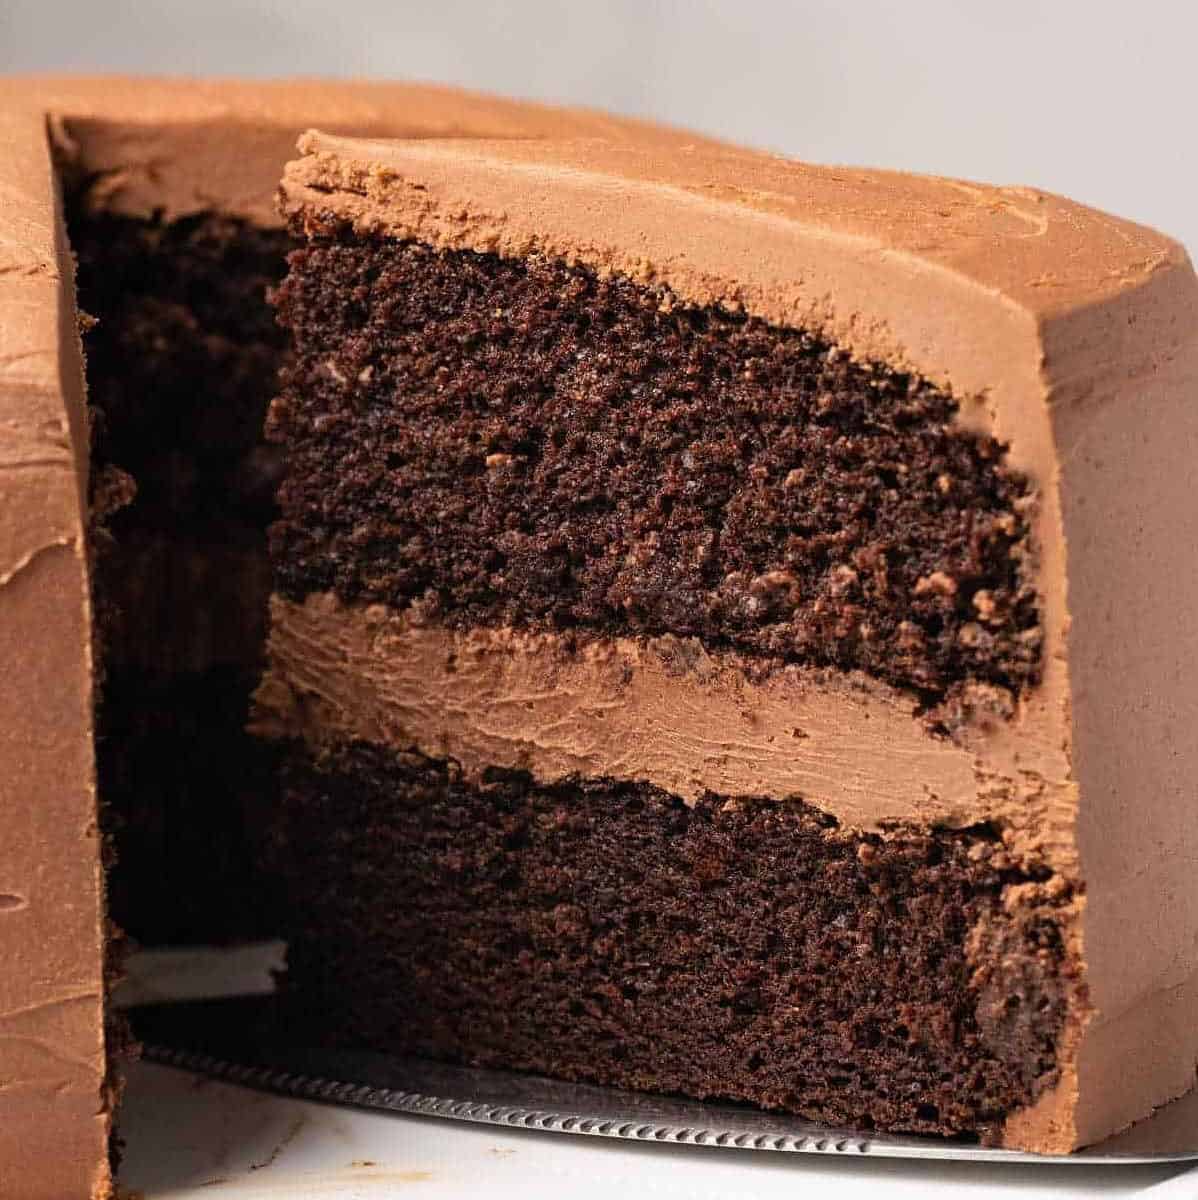  Chocolate lovers rejoice! This gluten-free, vegan, and sugar-free cake is sure to satisfy your sweet tooth!